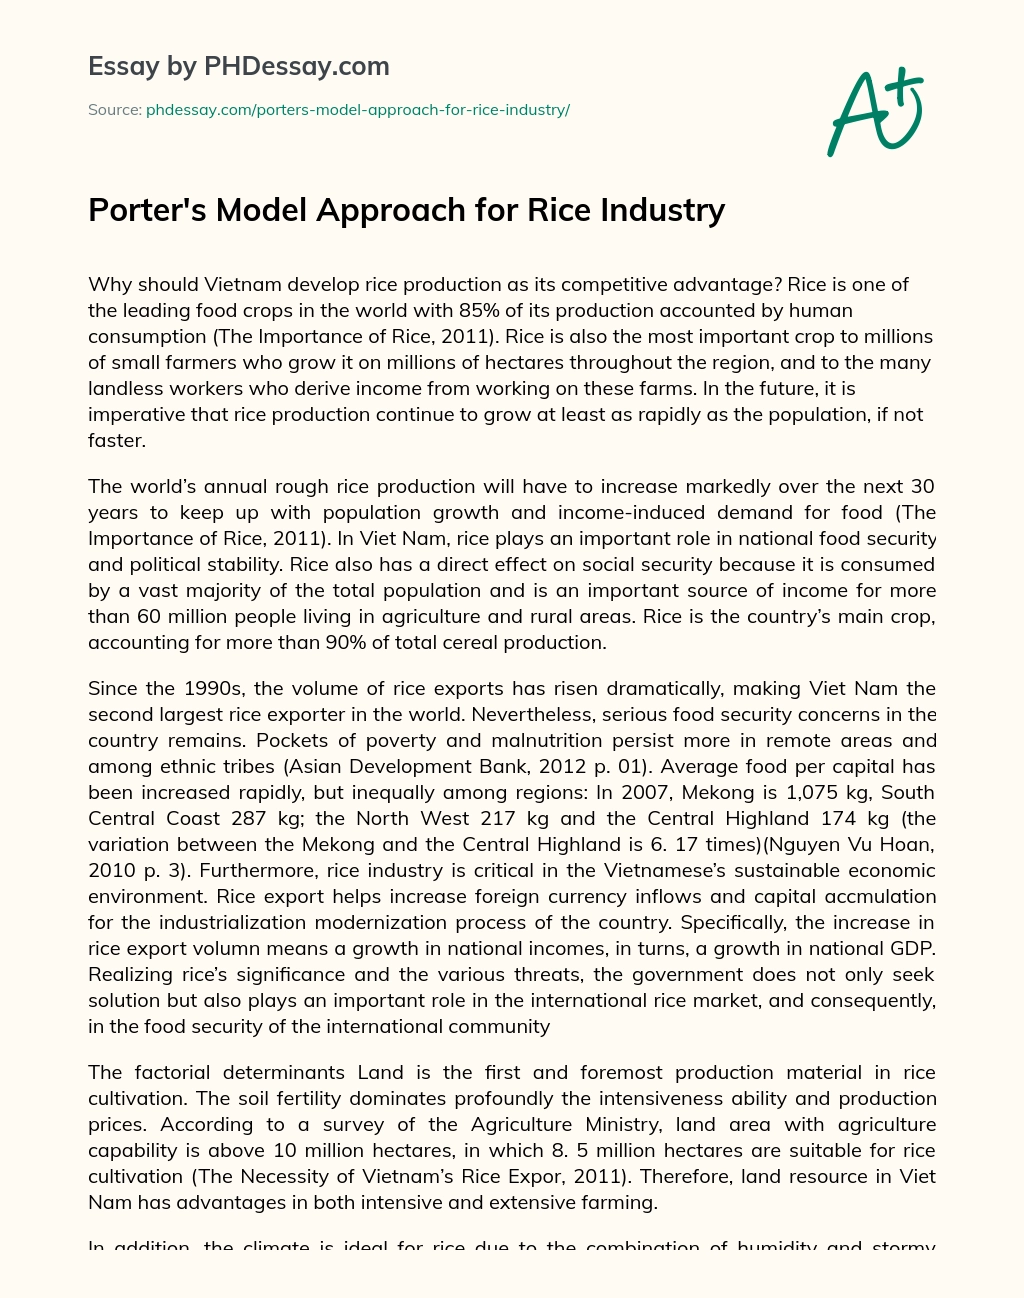 Porter’s Model Approach for Rice Industry essay